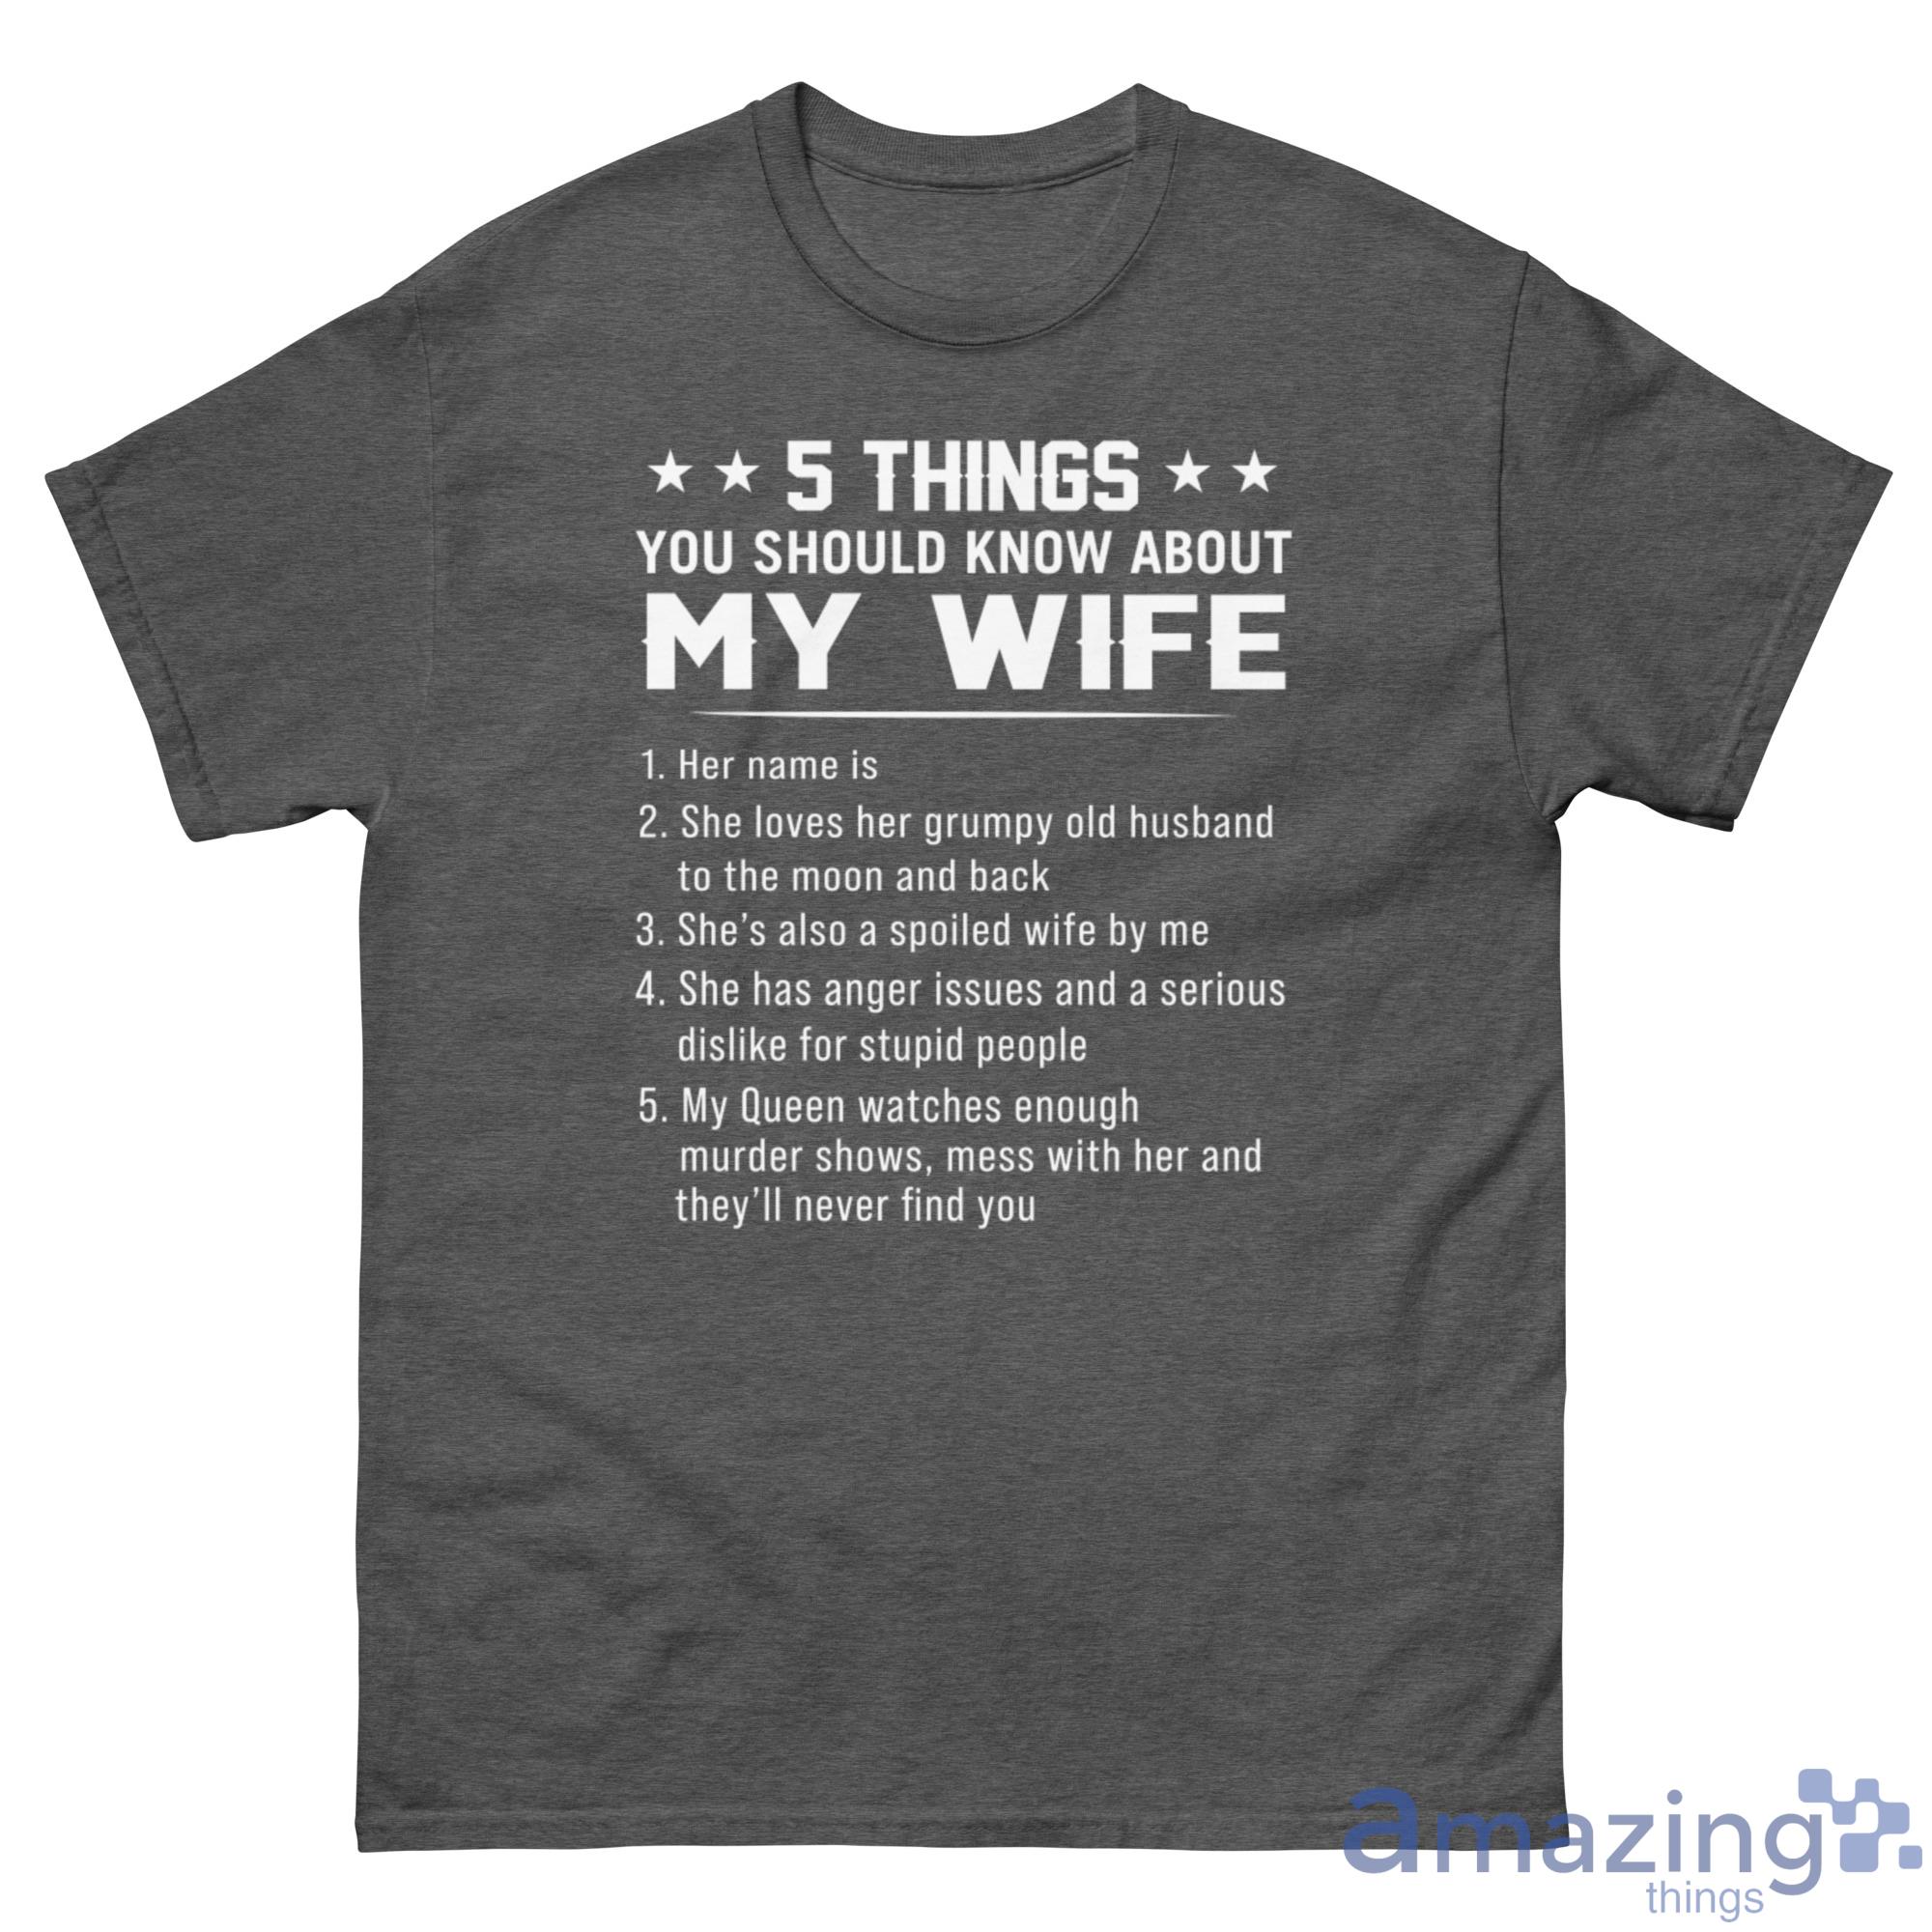 5 Things You Should Know About My Wife Personalized Name Shirt - G500 Men’s Classic Tee-1